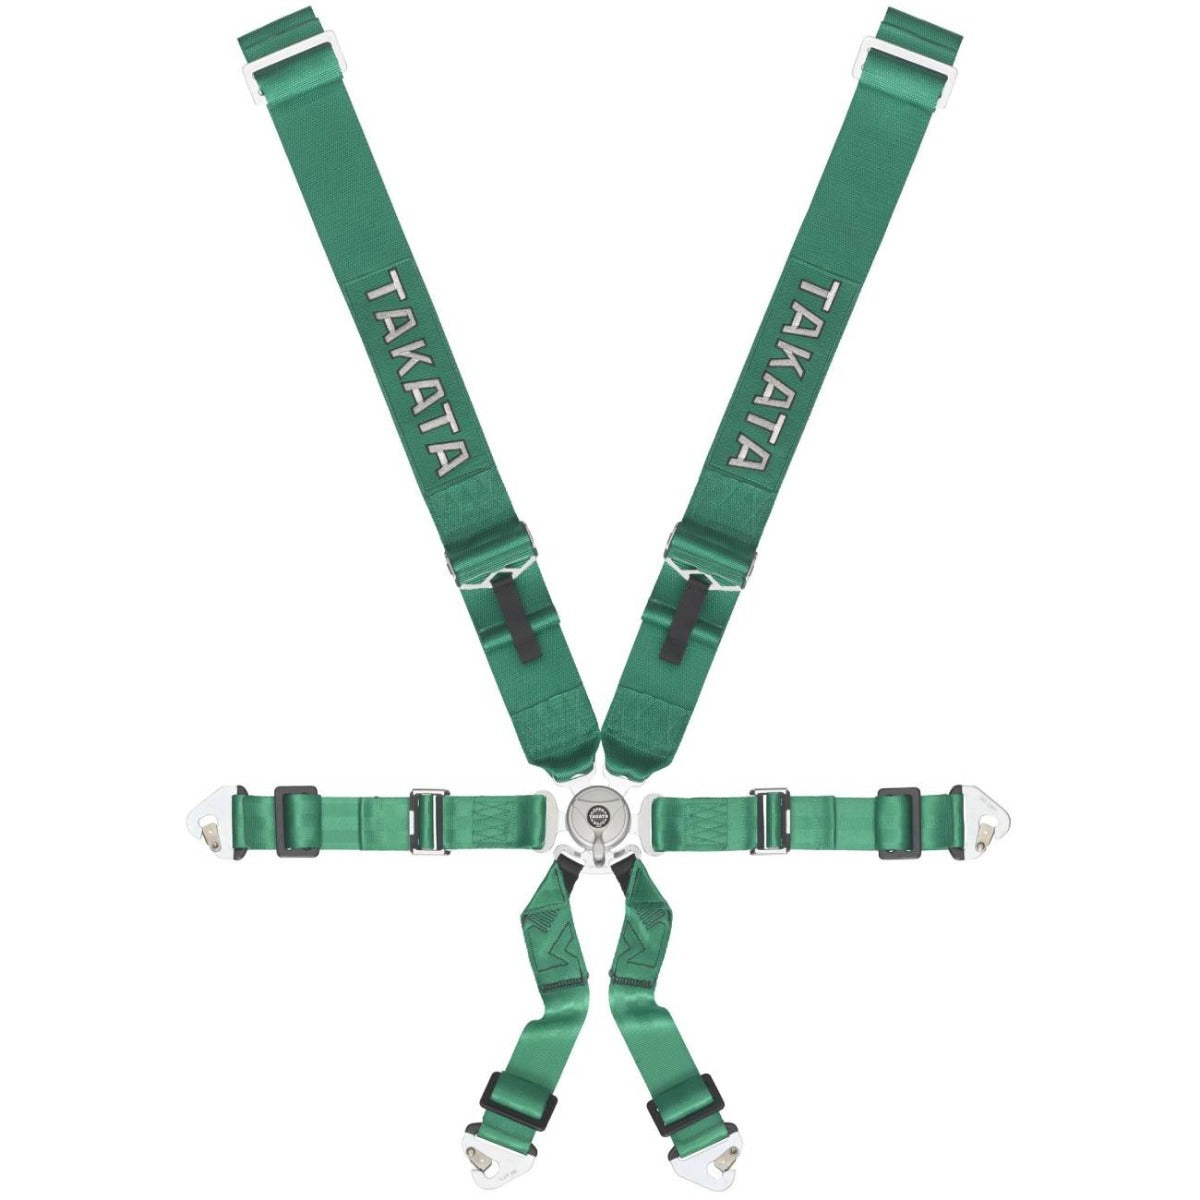 Takata Race 3x2 Snap-on 6 Point Harness - Green (FIA Approved)